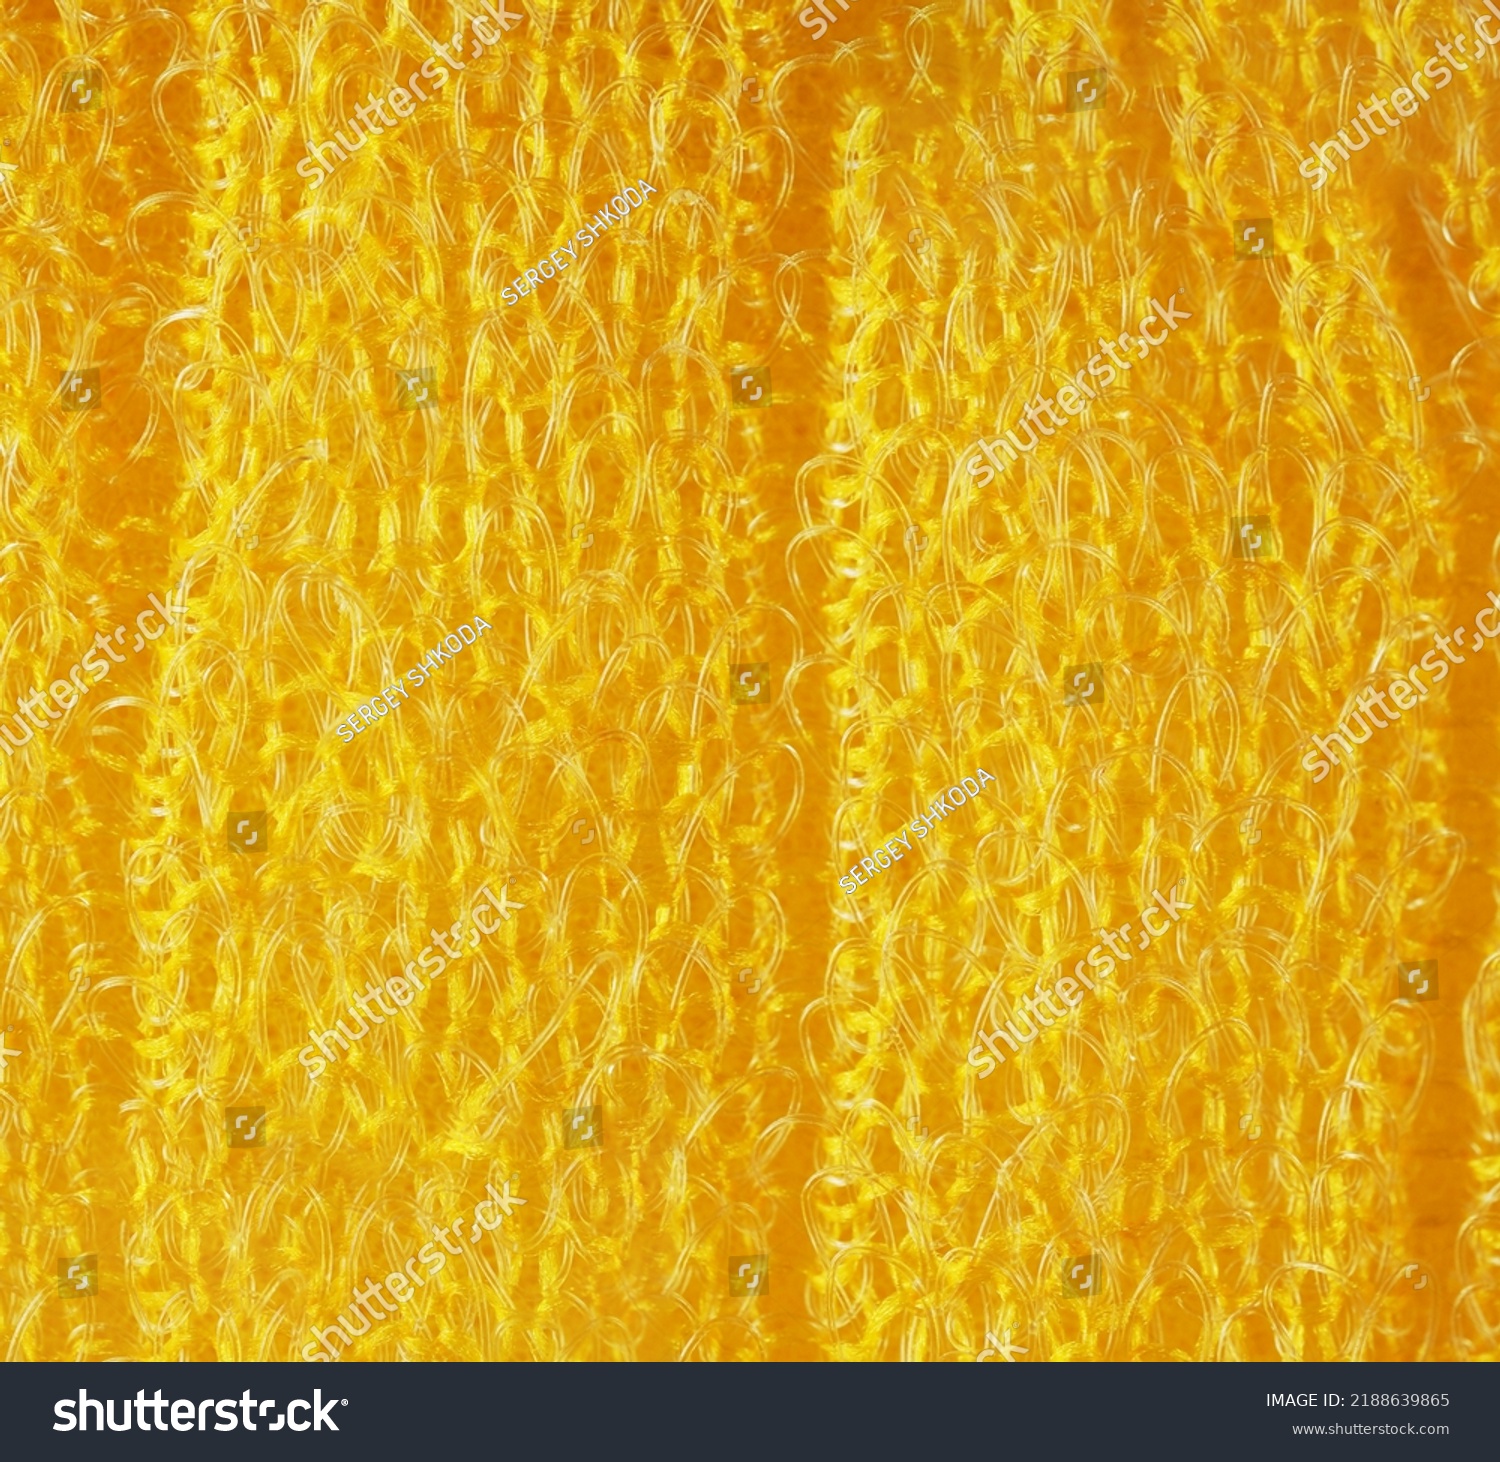 closeup, background, texture, large long vertical banner. heterogeneous surface structure bright saturated yellow sponge for washing dishes, kitchen, bath. full depth of field. high resolution photo #2188639865